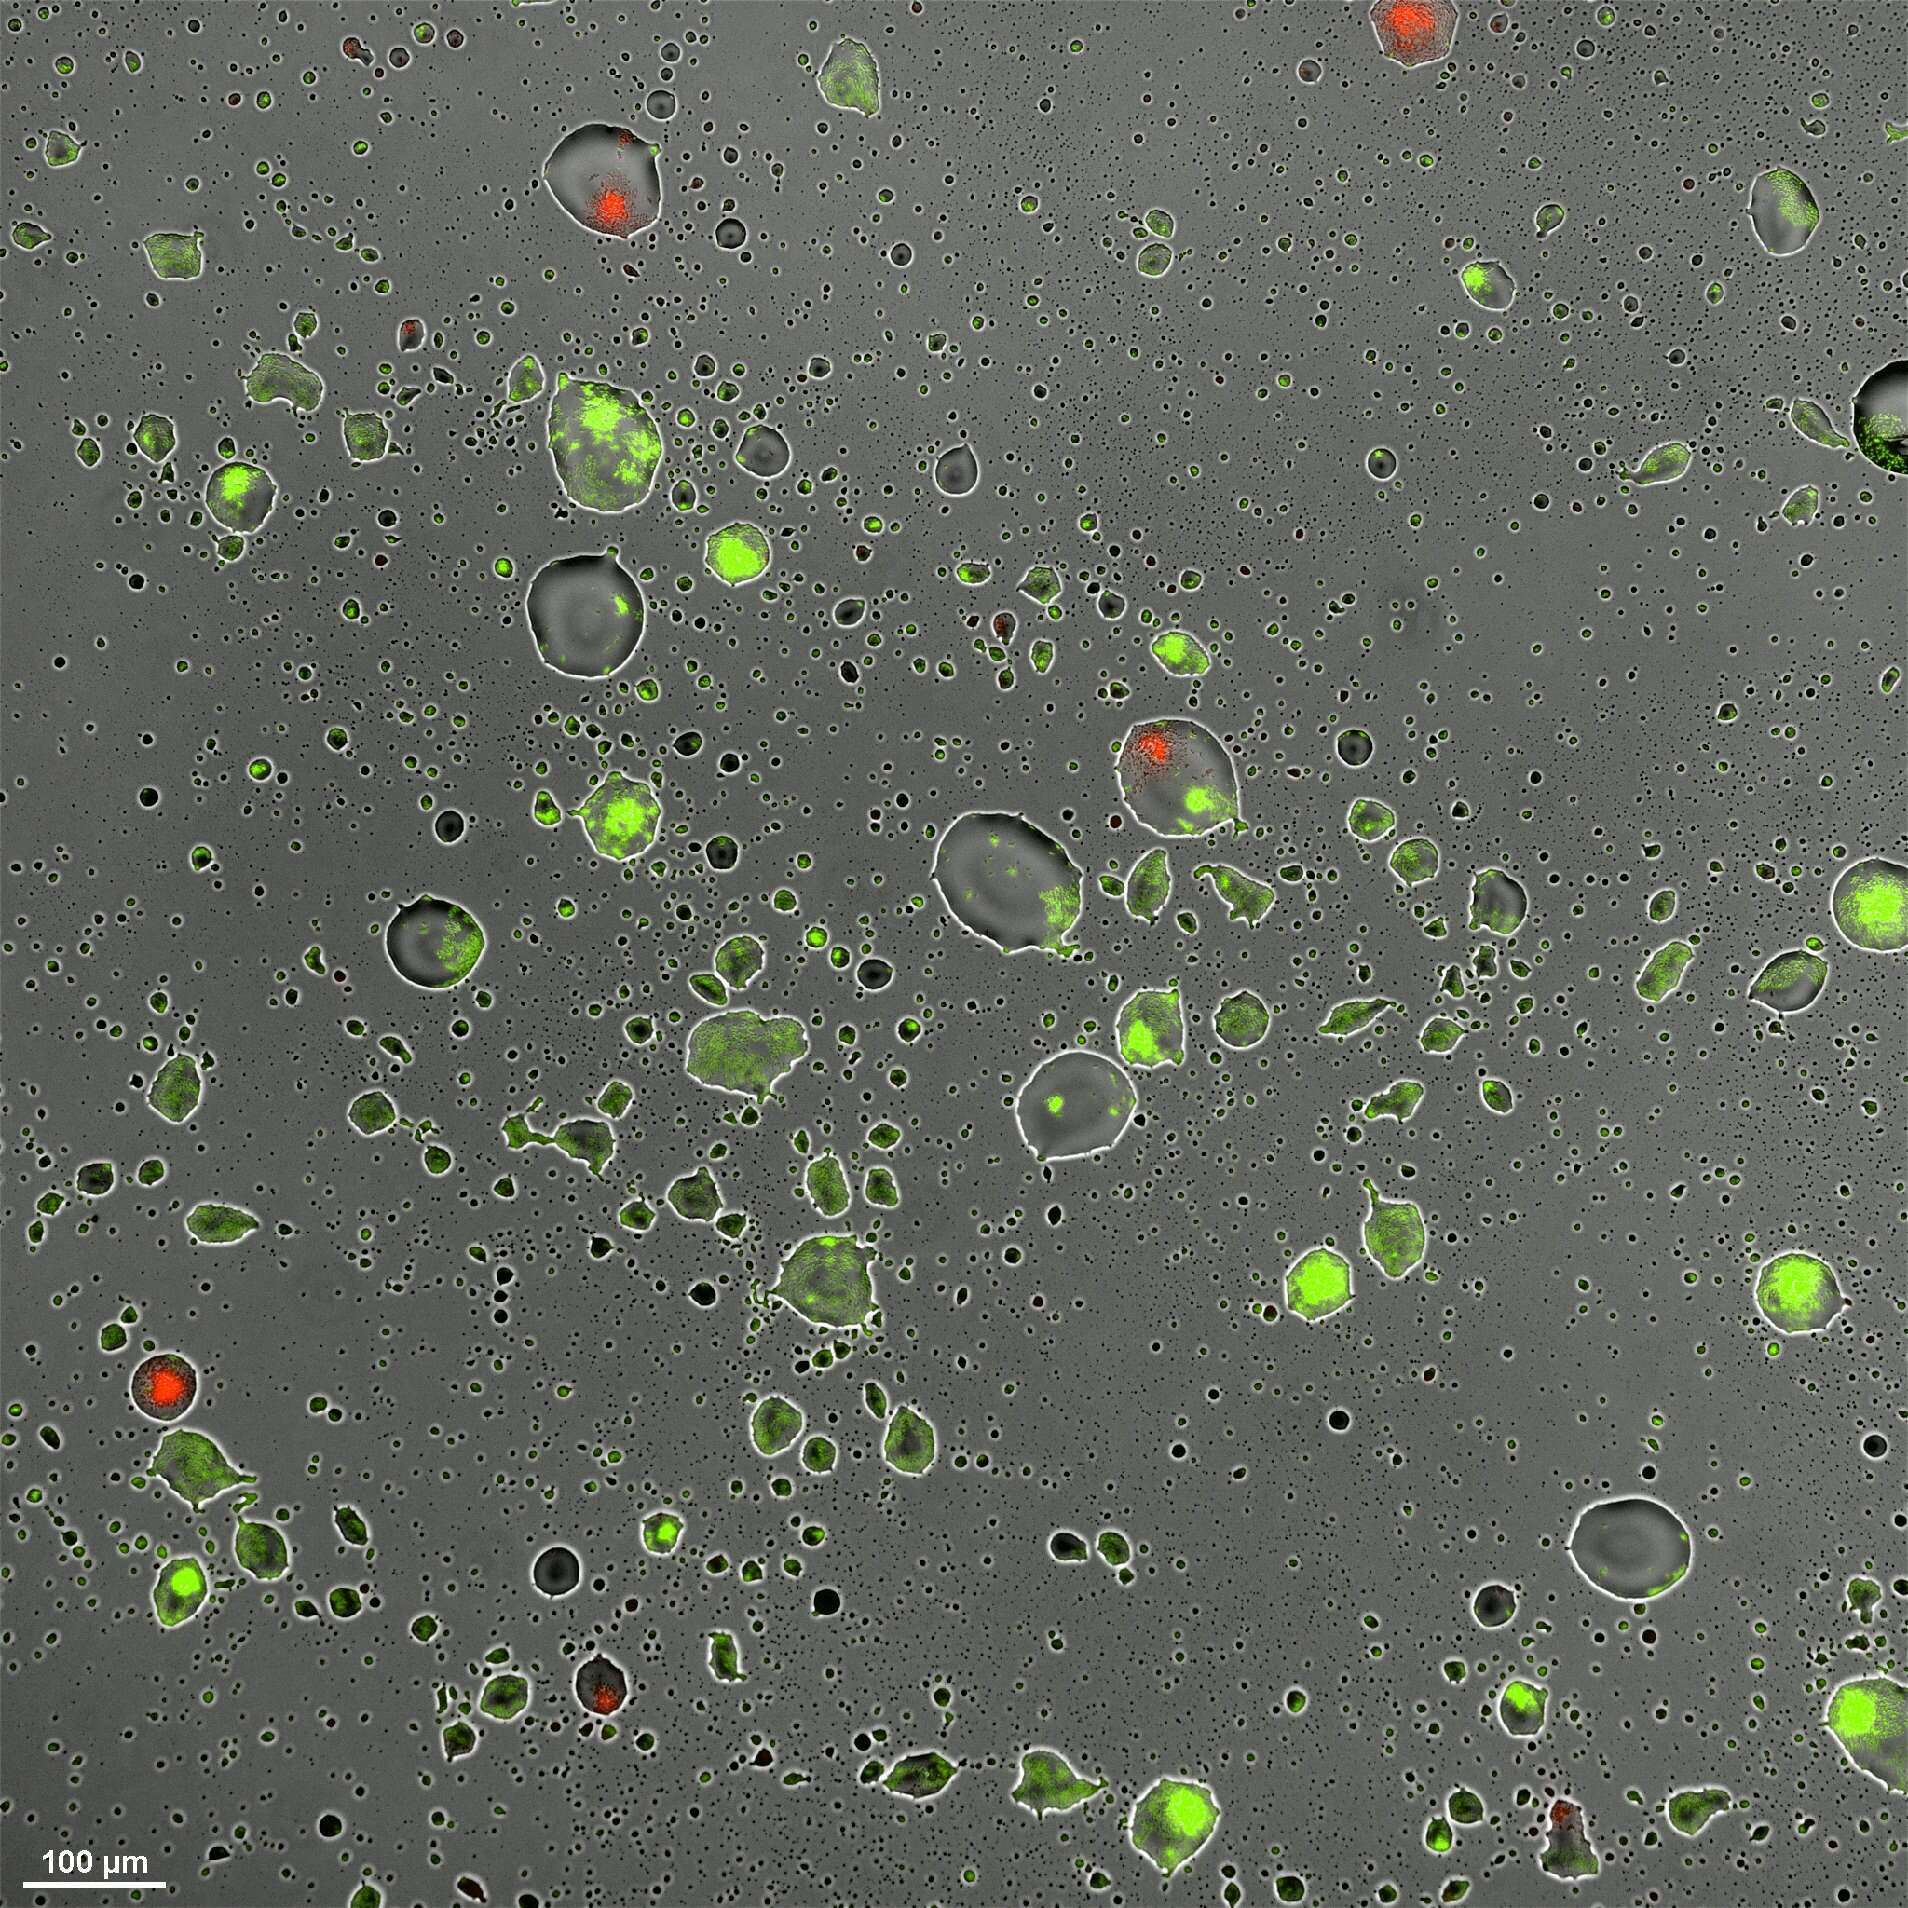 A glass surface covered with droplets engulfing Pseudomonas Fluorescens solitary and aggregates cells expressing GFP or mCherry 